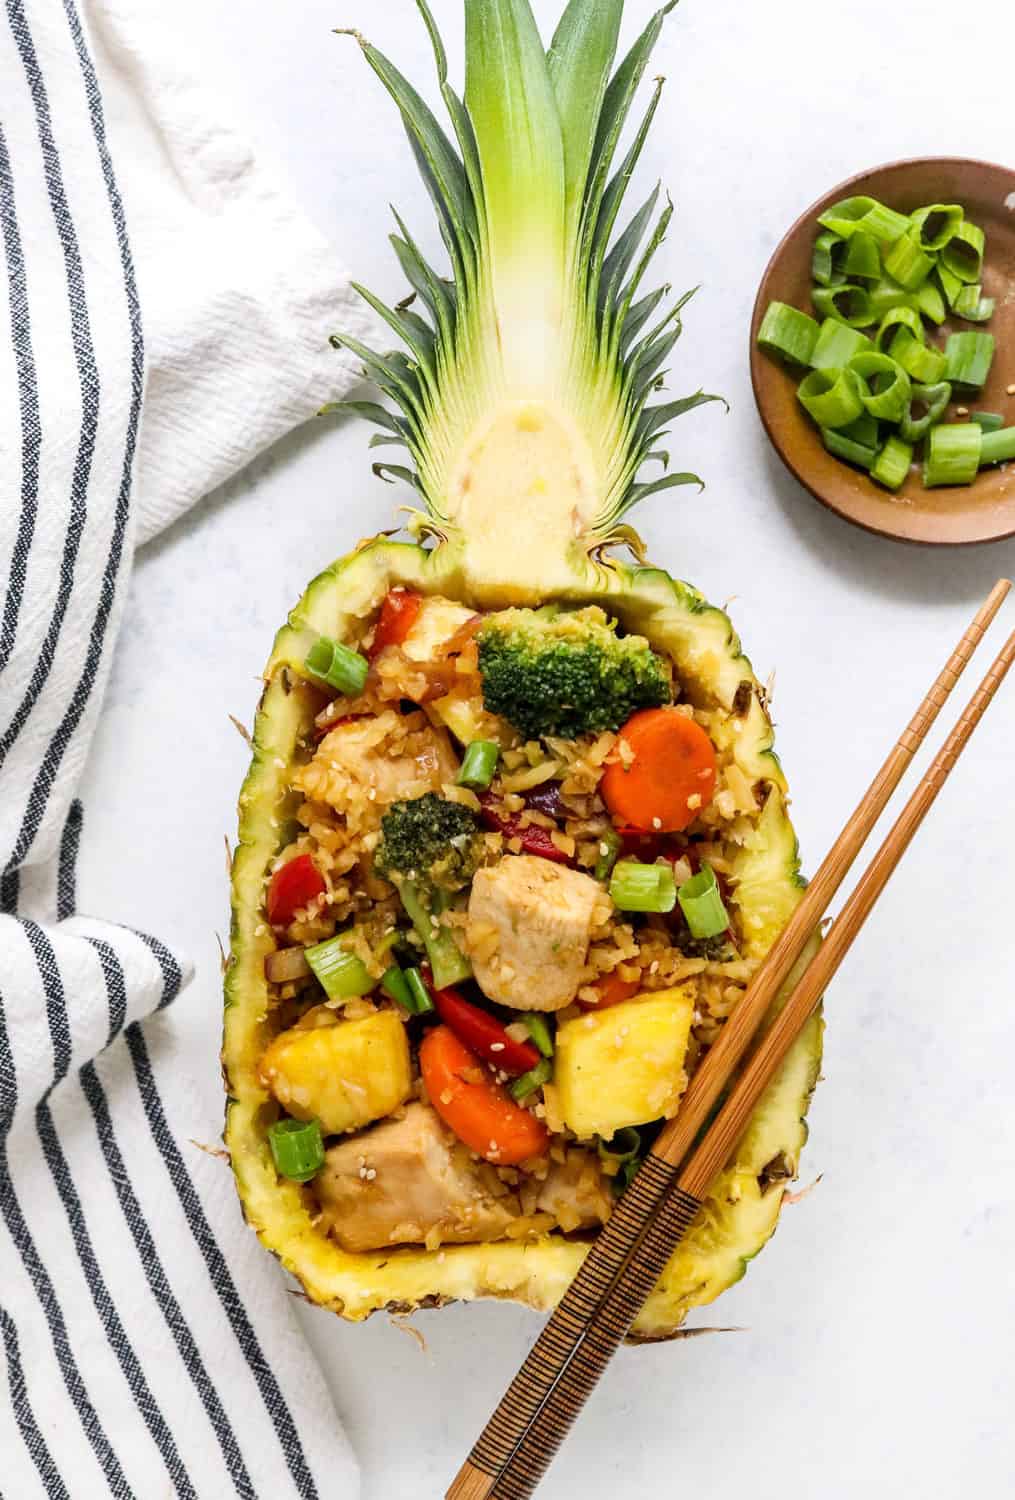 whole half of a pineapple filled with chicken and veggies with a pair of brown chopsticks sitting on the top side of it with a brown bowl of sliced scallions next to the pineapple.